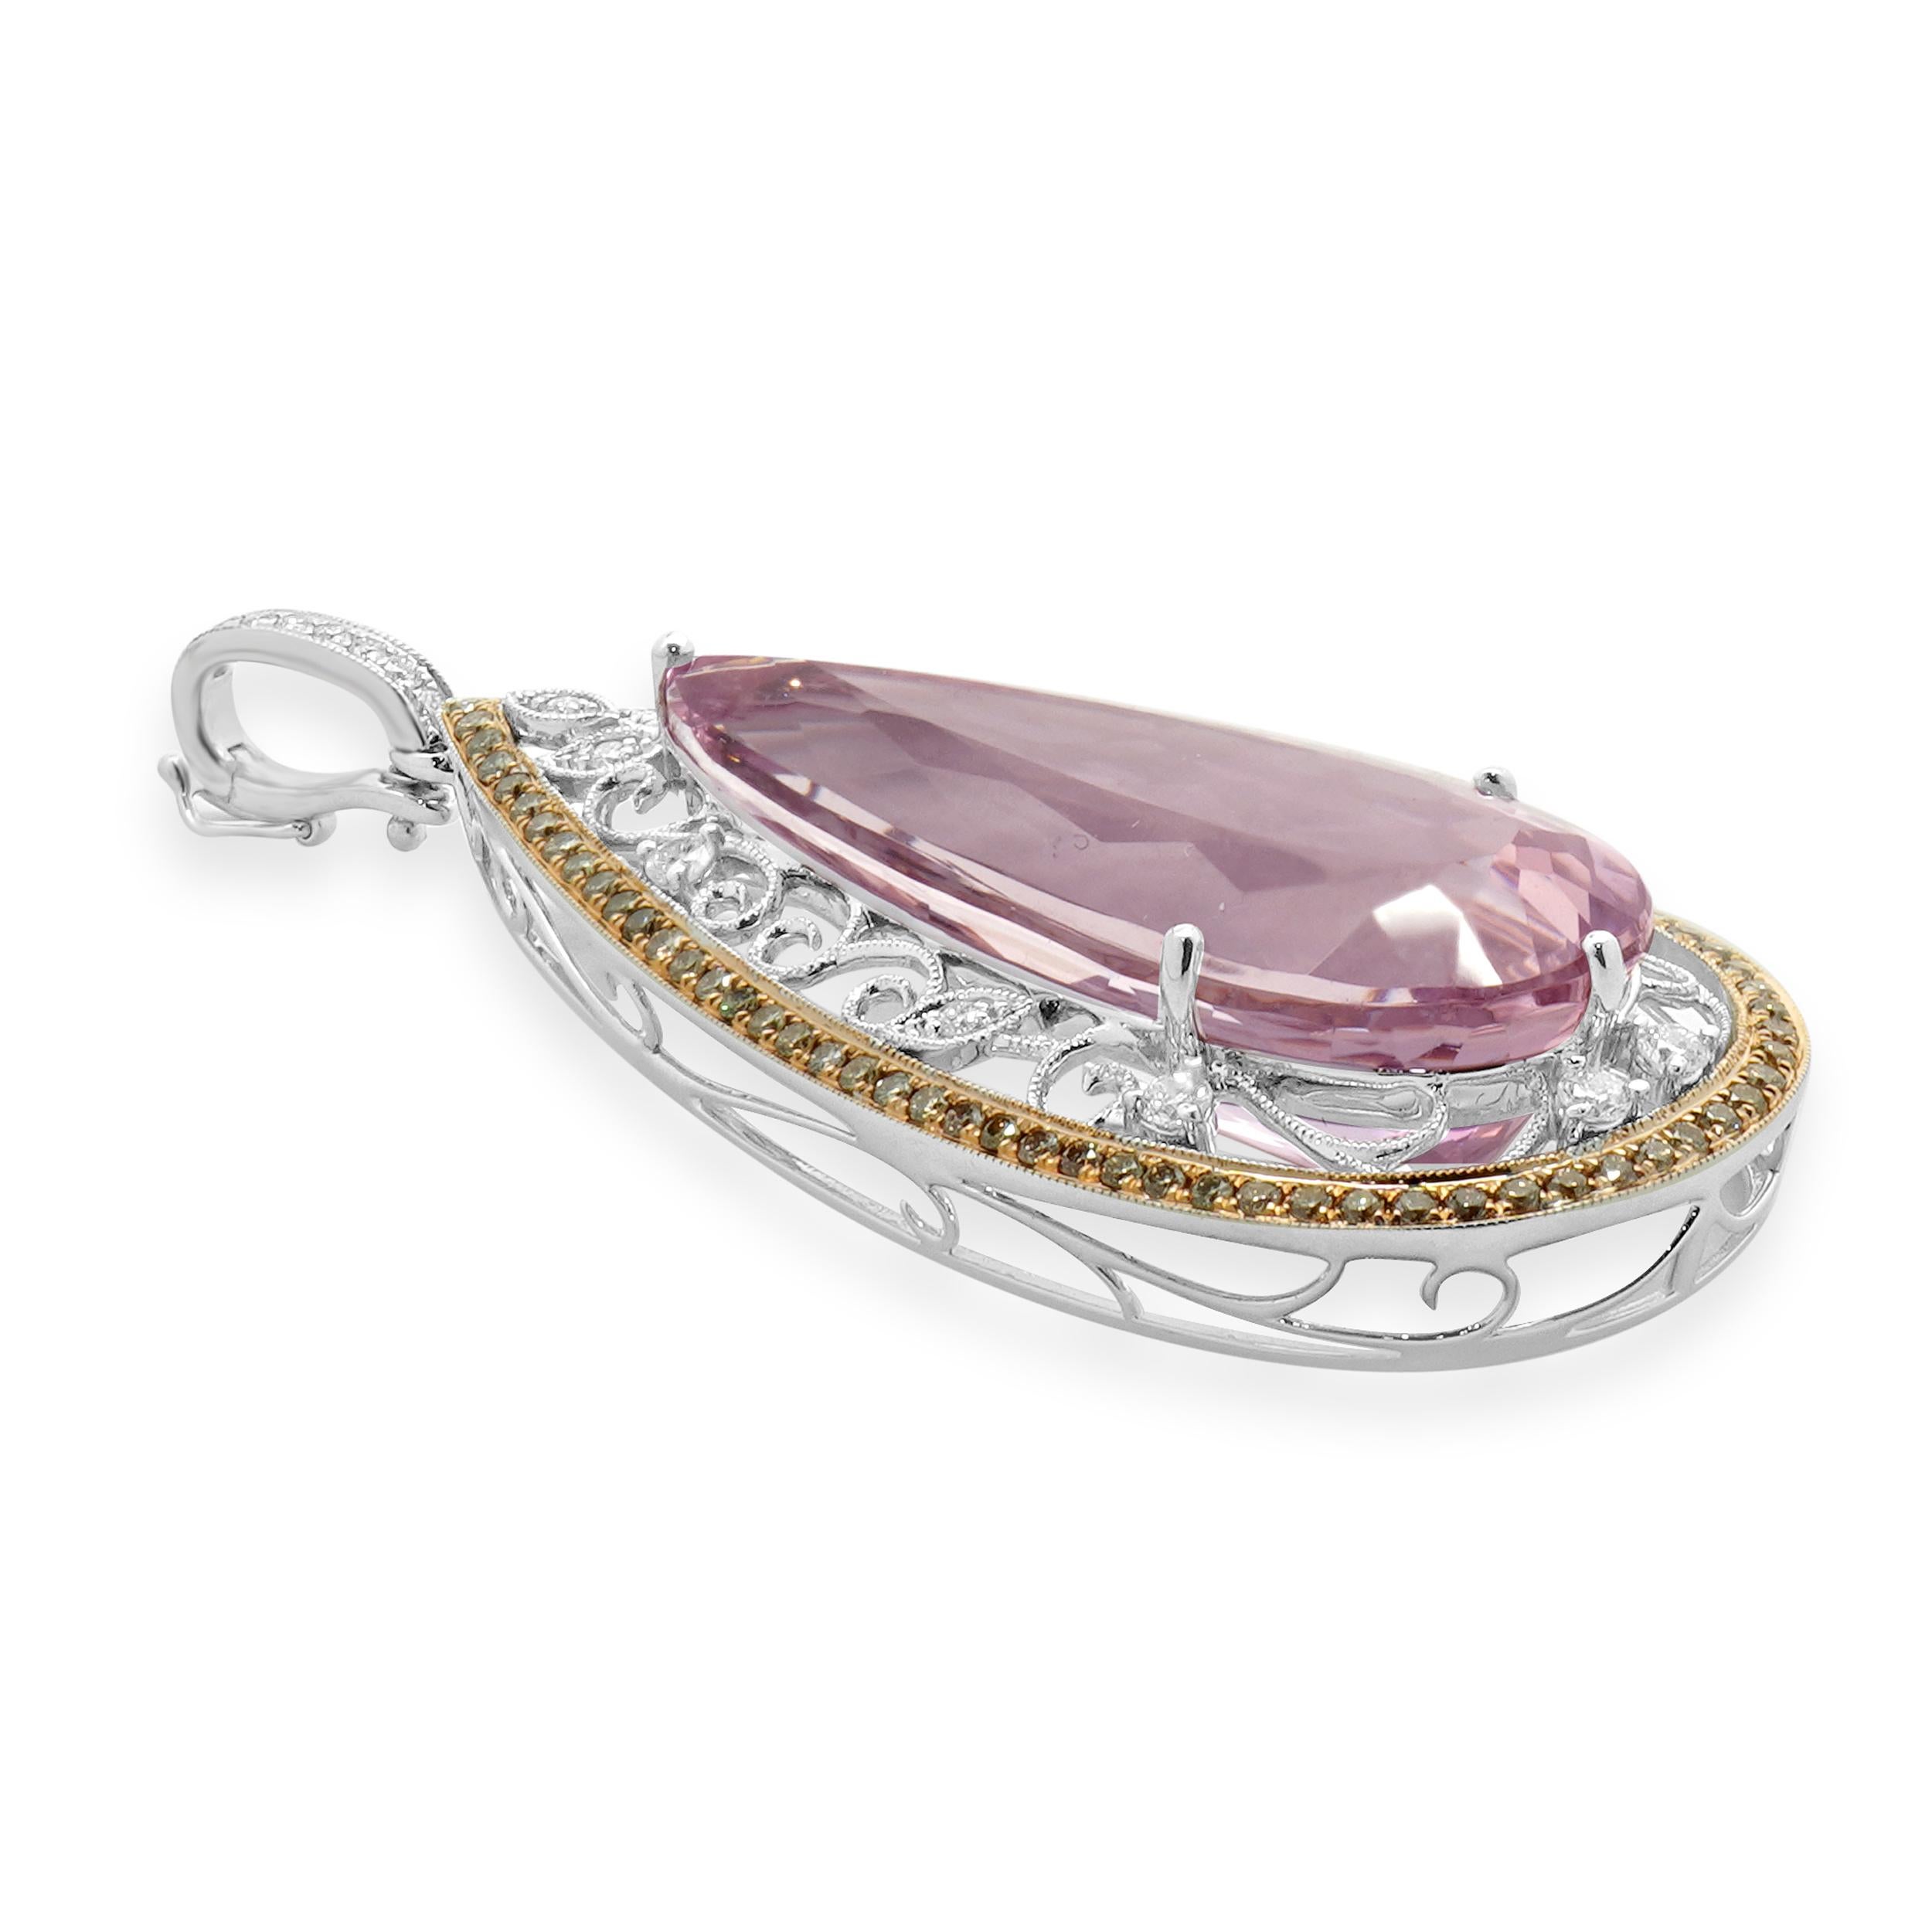 18 Karat White and Rose Gold Diamond and Kunzite Pendant In Excellent Condition For Sale In Scottsdale, AZ